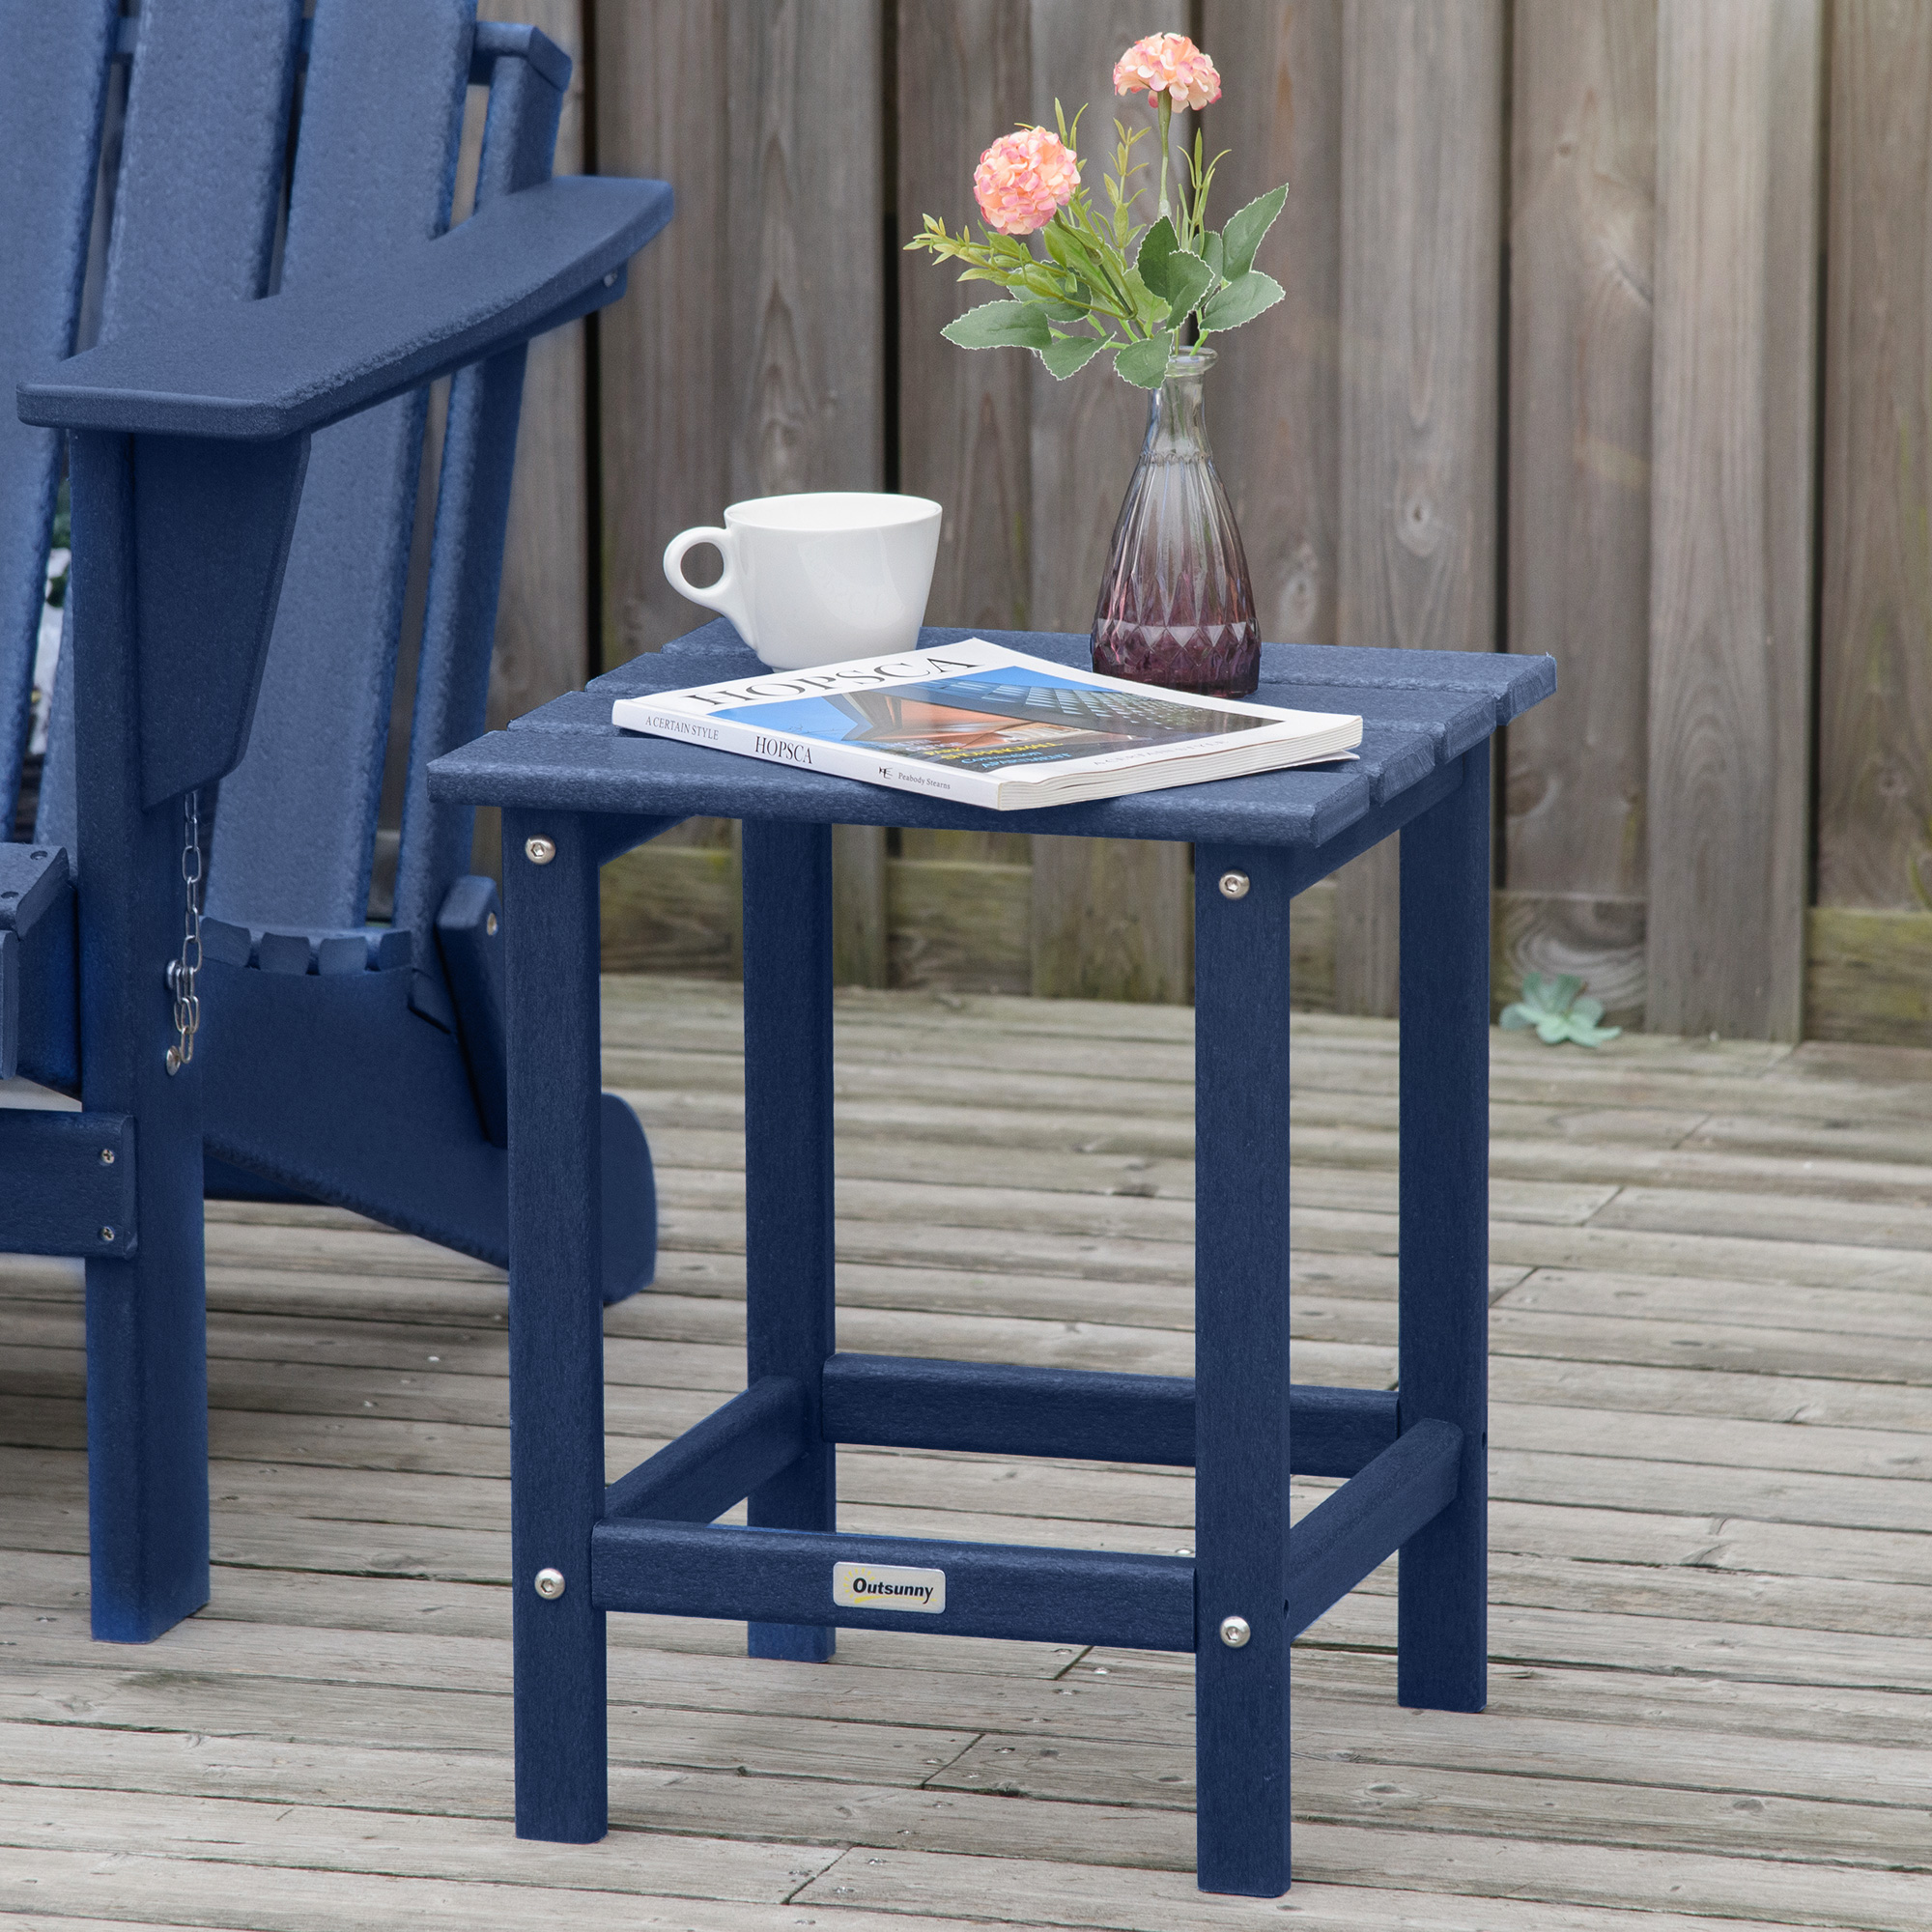 Outsunny 15" Patio End Table, HDPE Plastic, Blue - image 2 of 9